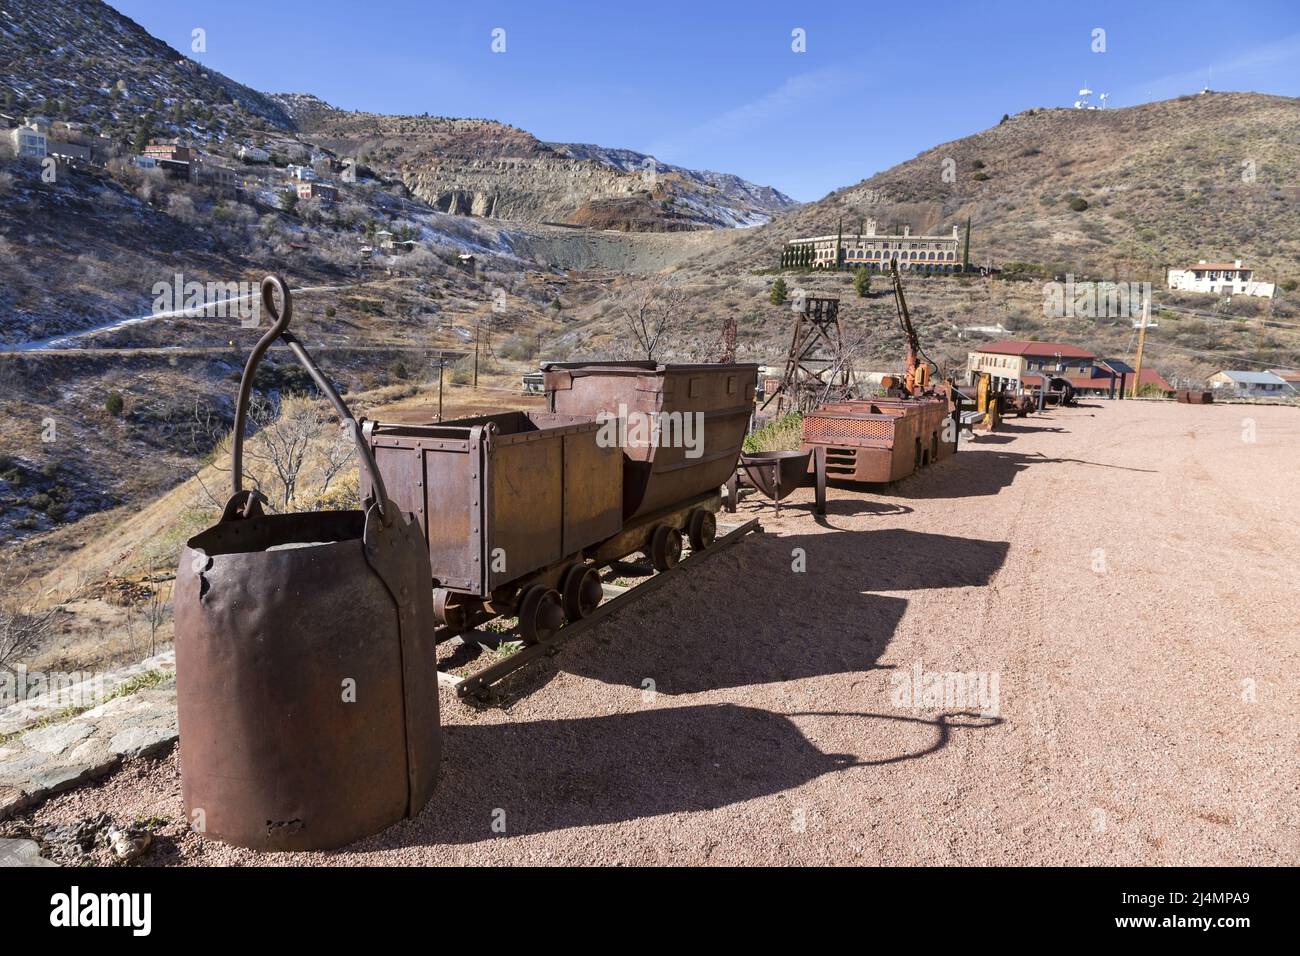 Vintage Old Rusted Copper Mining Cart Equipment in Front of Famous Jerome State Historic Arizona Park Visitor Center Stock Photo